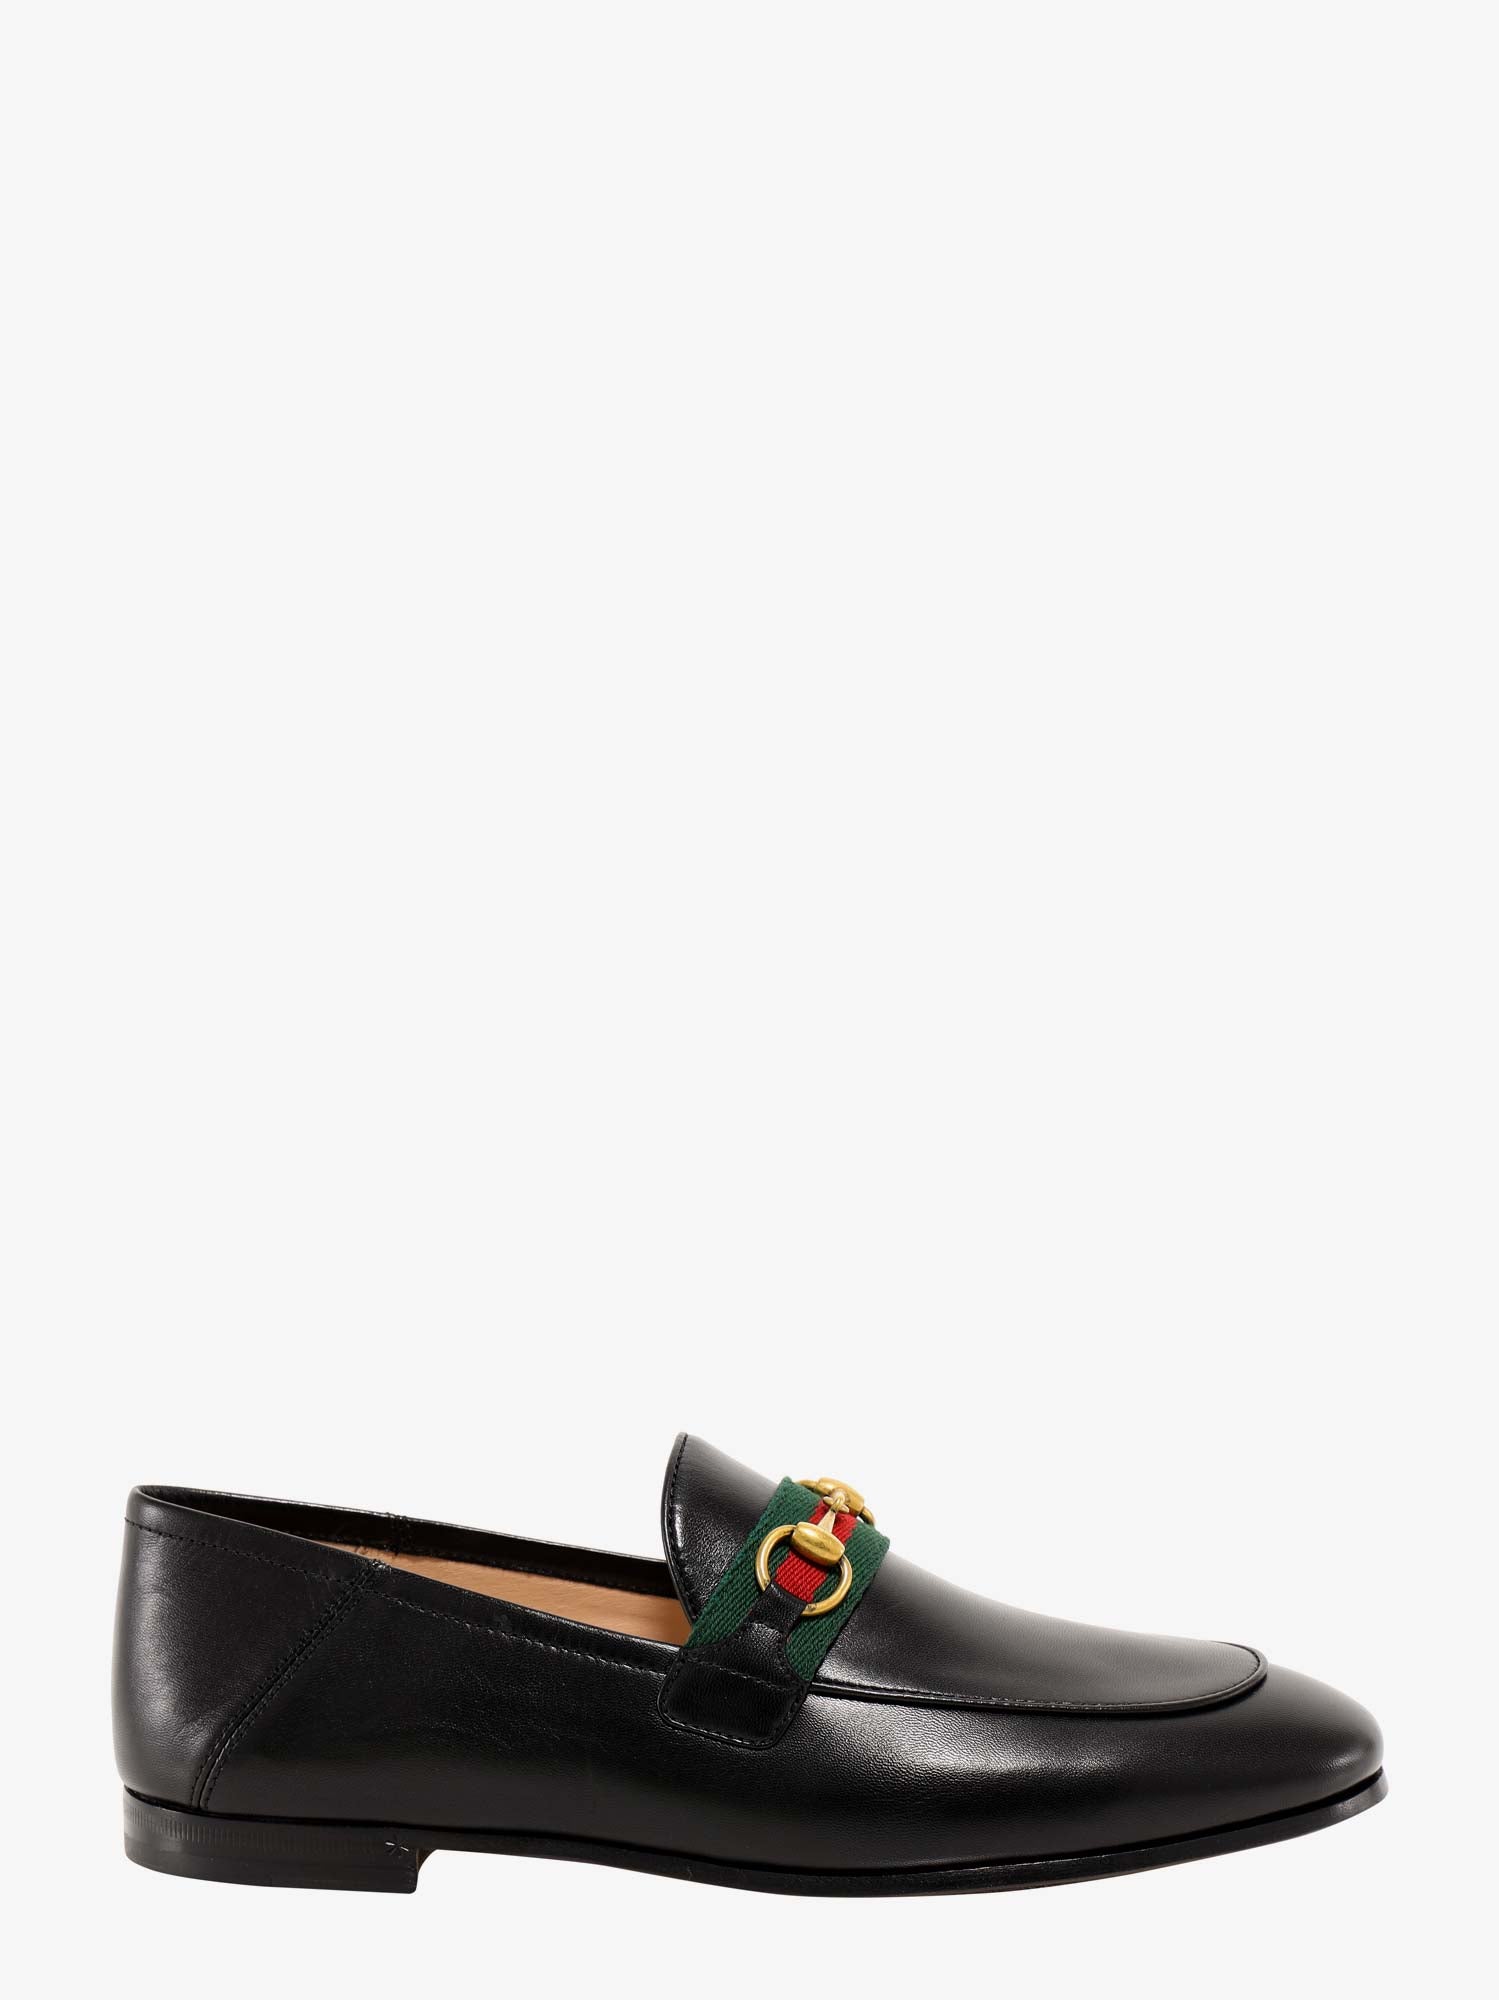 Gucci Woman Loafer Woman Black Loafers